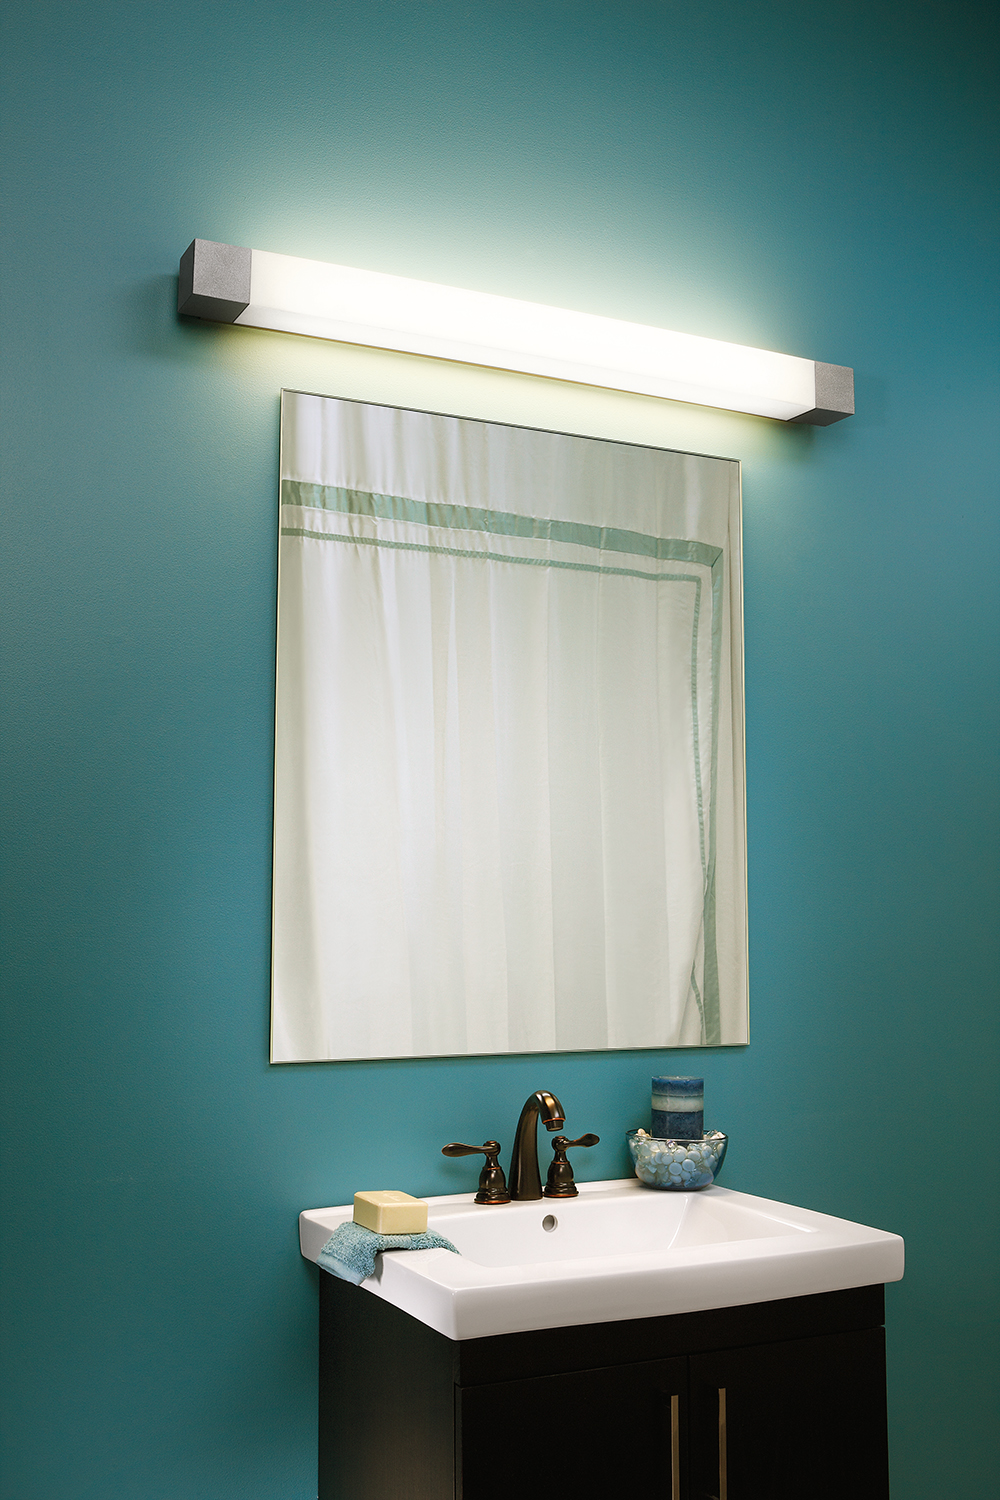 Shine modern vanity light fixture mounted horizontally over a minimalist mirror and vanity for multifamily residential design.